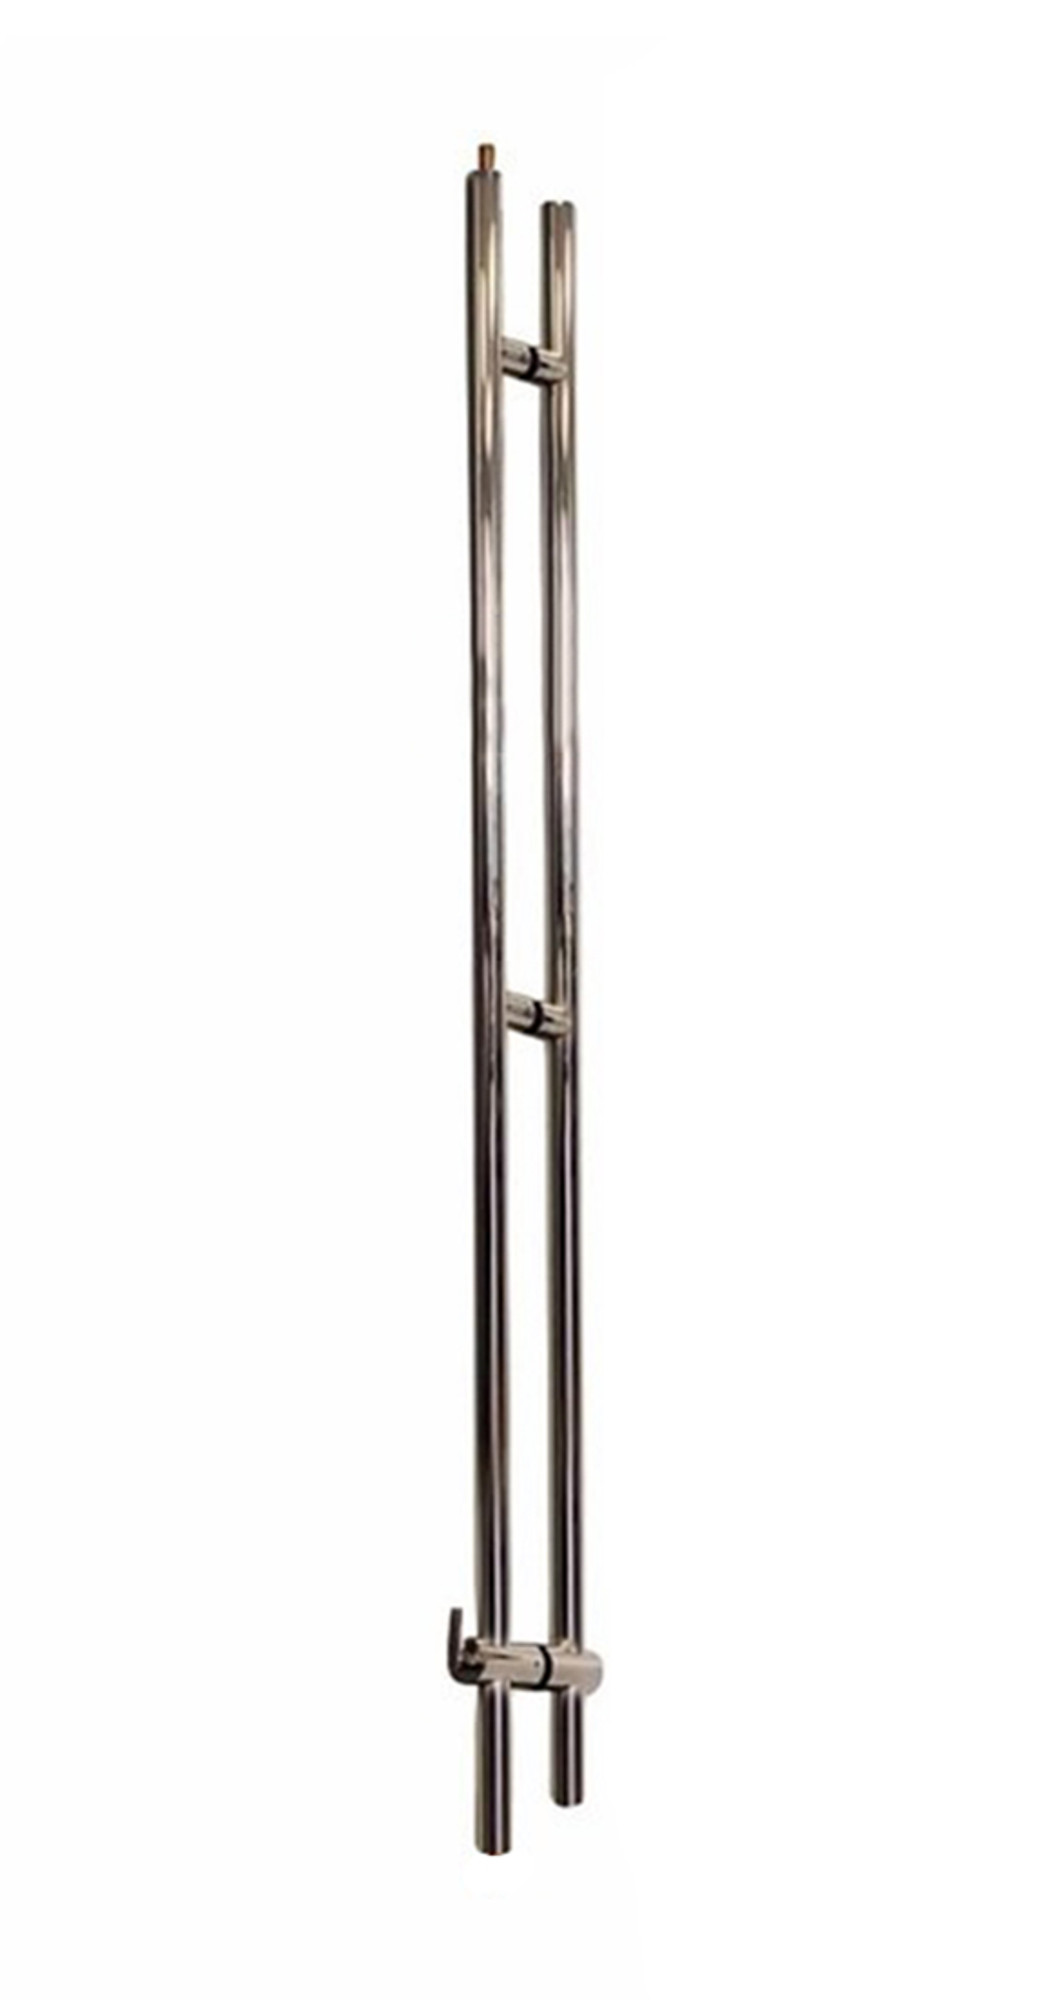 Pro-Line Series: 72" Upward Locking Ladder Pull Handle - Back-to-Back, Polished US32/629 Finish, 316 Exterior Grade Stainless Steel Alloy